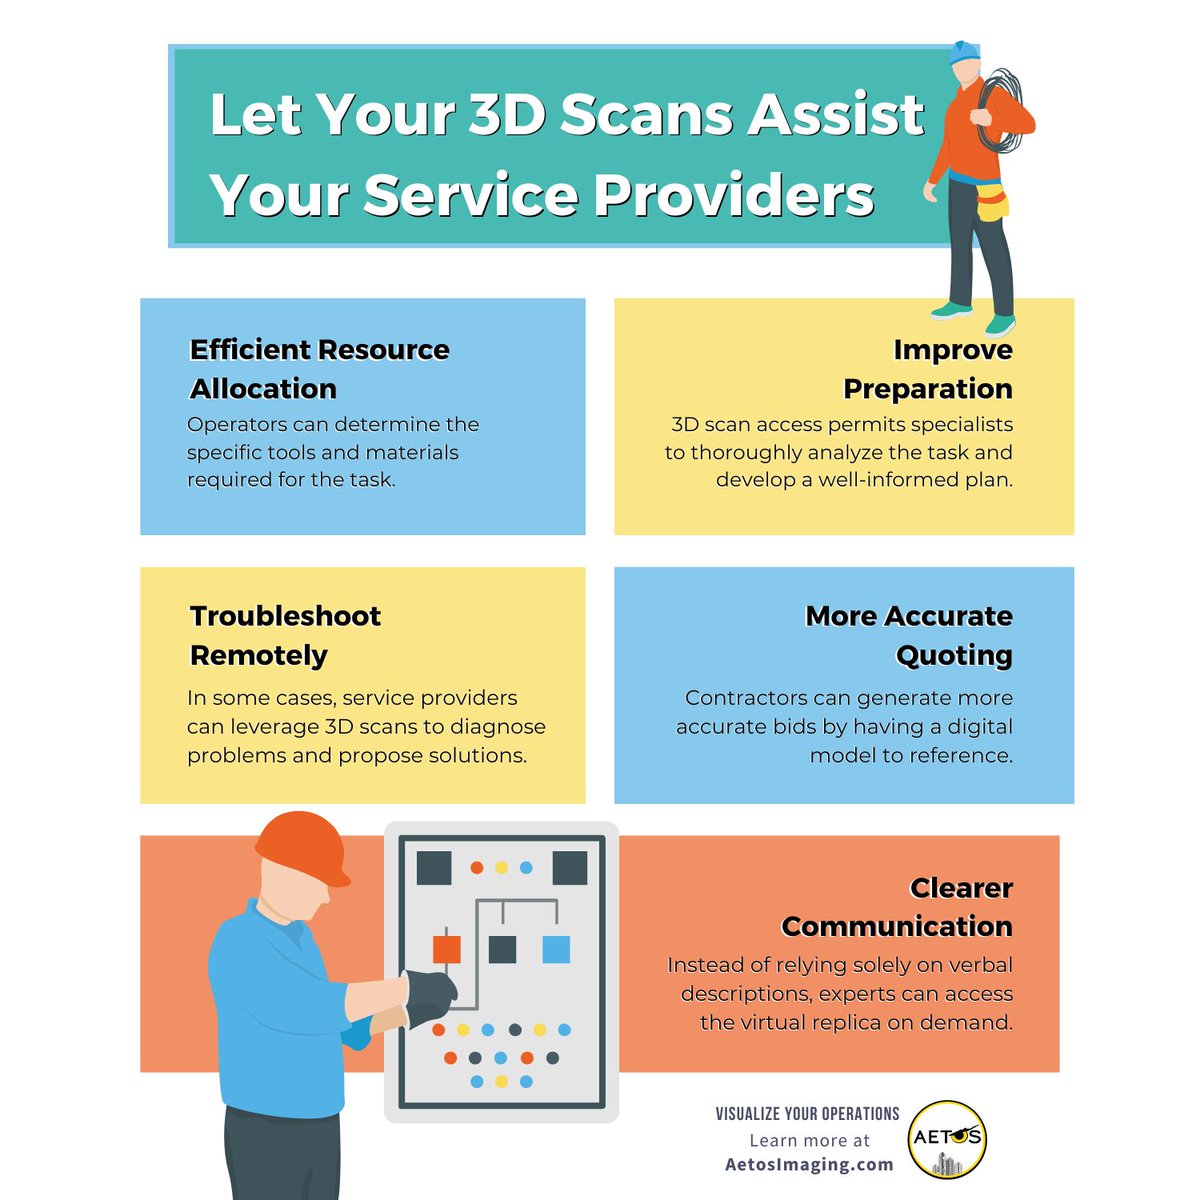 A digitized space can offer several advantages when outsourcing. 3D Scans can support your operations and service providers to save time, money, energy, and more.

Don't have 3D scans yet? Contact Aetos today!

#AetosImaging #3DScans #ServiceProviders #FacilitiesManagement